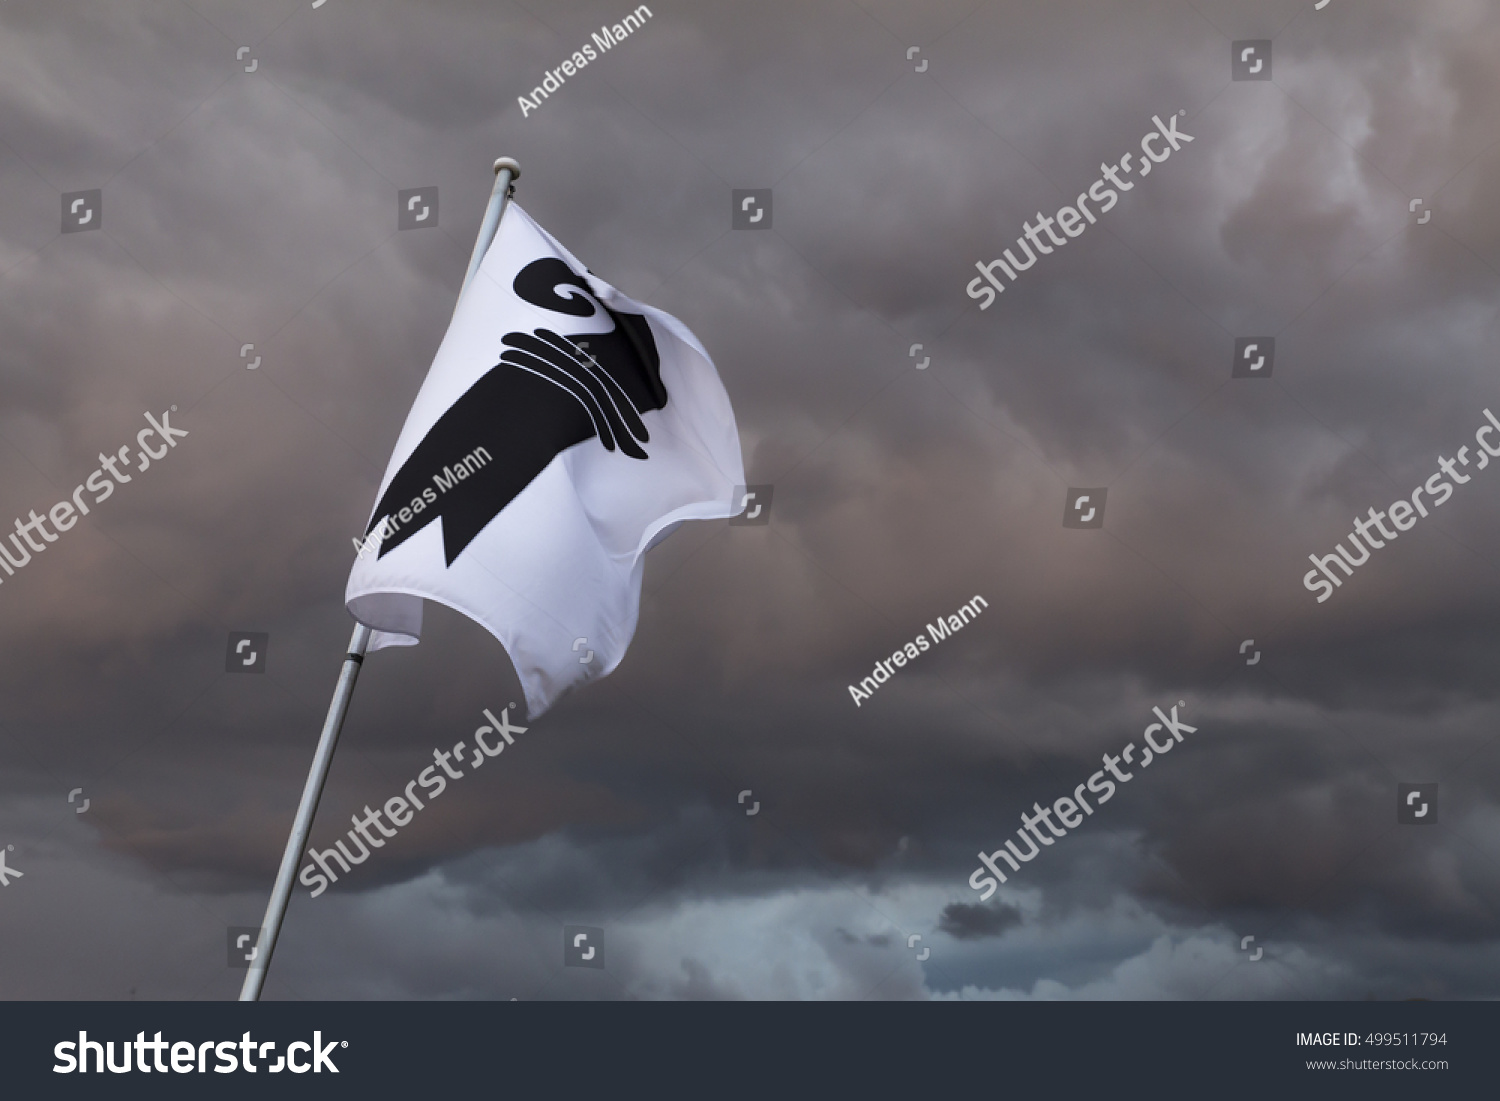 A single flag of Basel in Switzerland in front of a gloomy sky. Dark storm clouds loom in the background #499511794